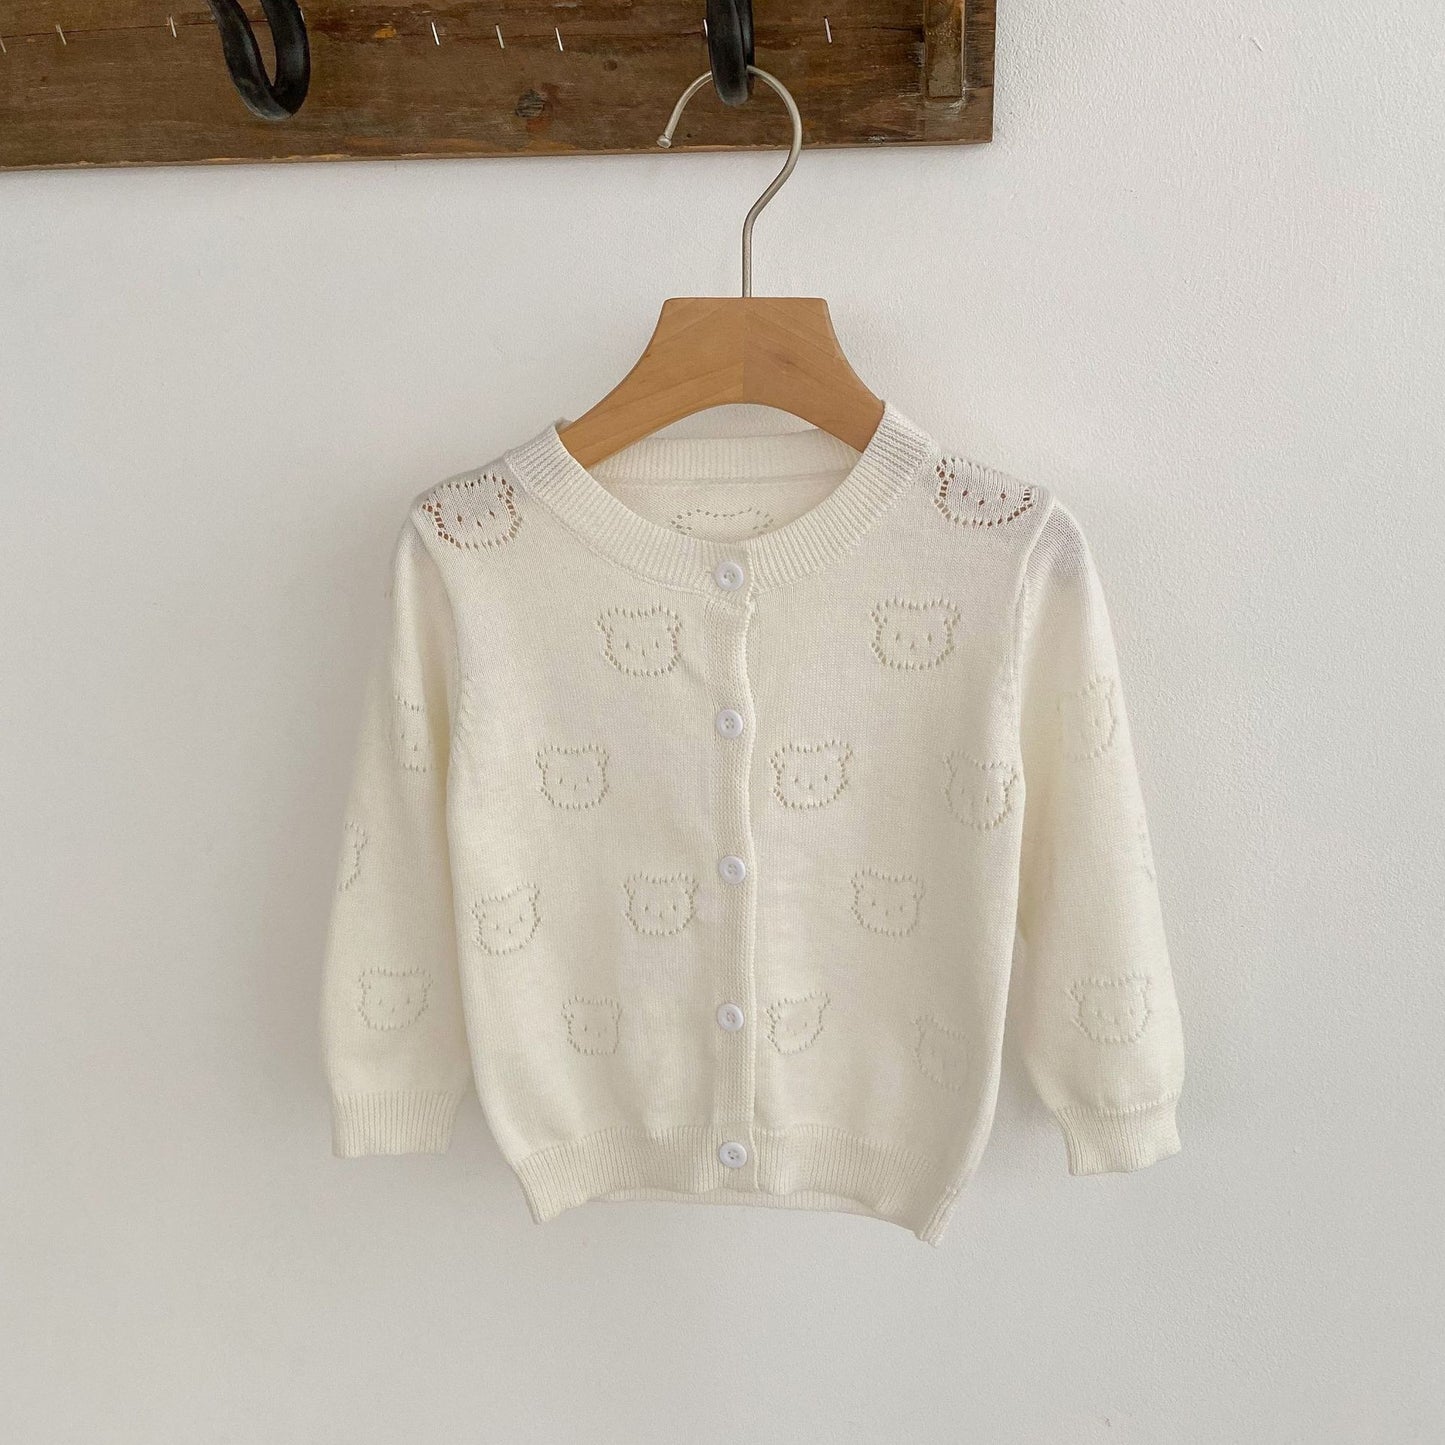 Baby Girl Hollow Carved Design Thin Style Soft Cotton Cardigan